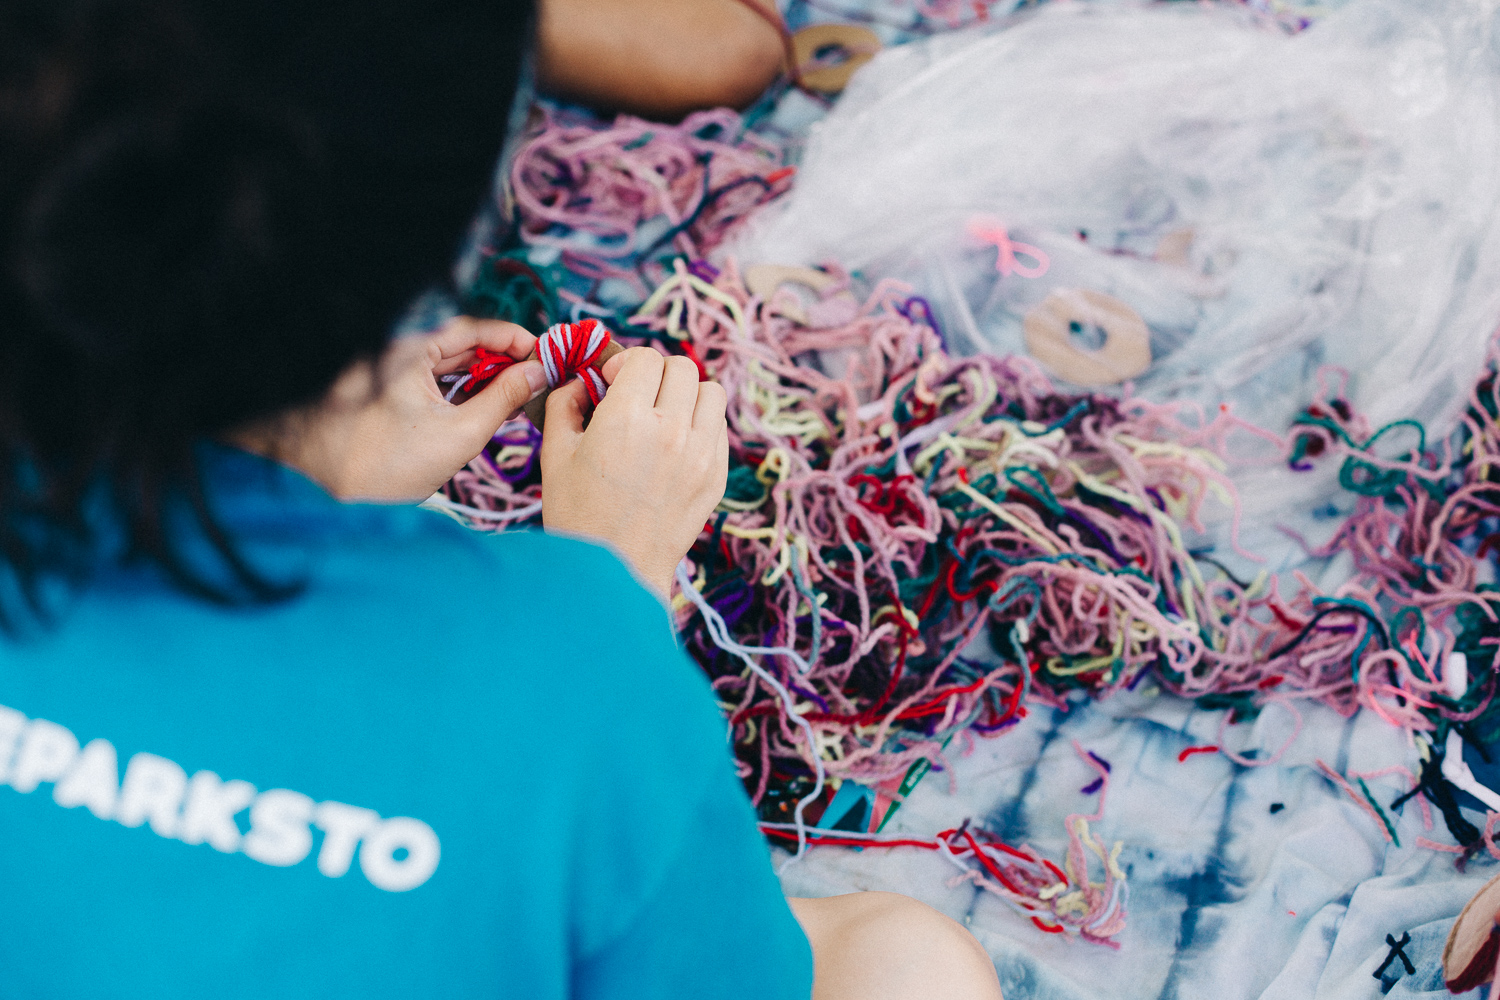 A woman in a blue shirt sits and weaves with a pile of yarn in front of her.